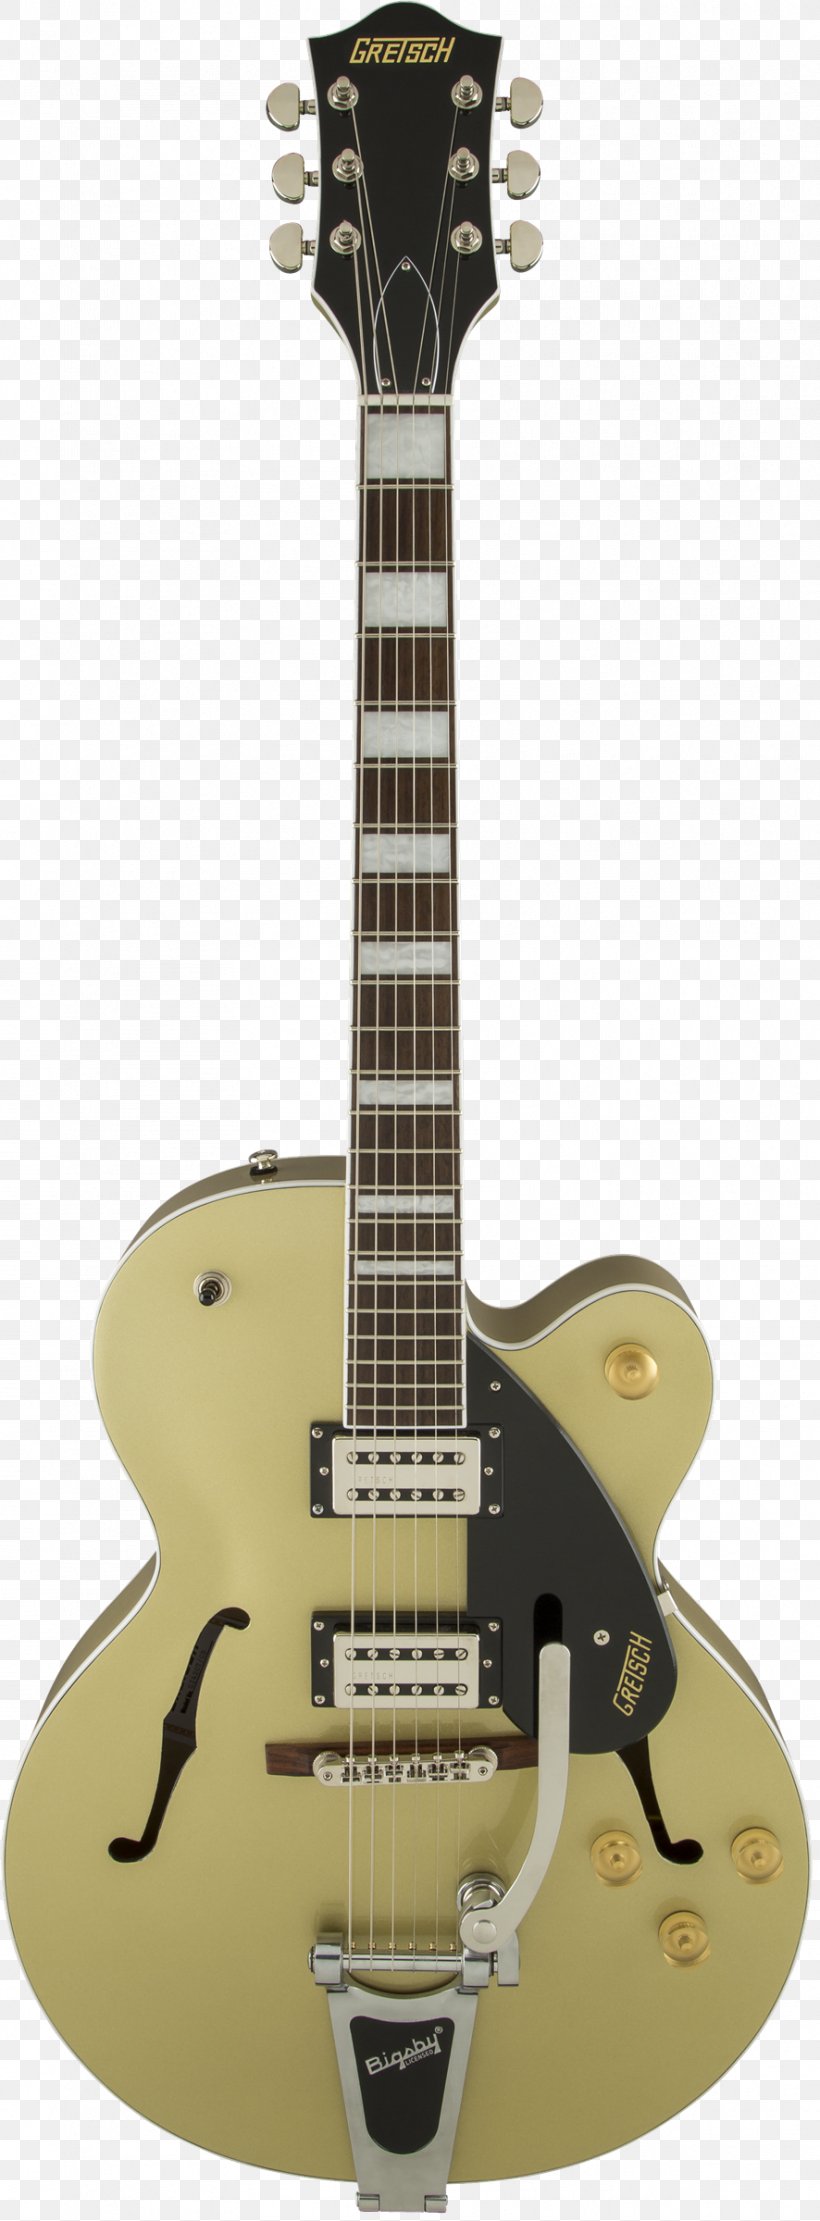 Gretsch G2420 Streamliner Hollowbody Electric Guitar Gretsch G5420T Streamliner Electric Guitar Bigsby Vibrato Tailpiece, PNG, 886x2400px, Gretsch, Acoustic Electric Guitar, Acoustic Guitar, Archtop Guitar, Bass Guitar Download Free